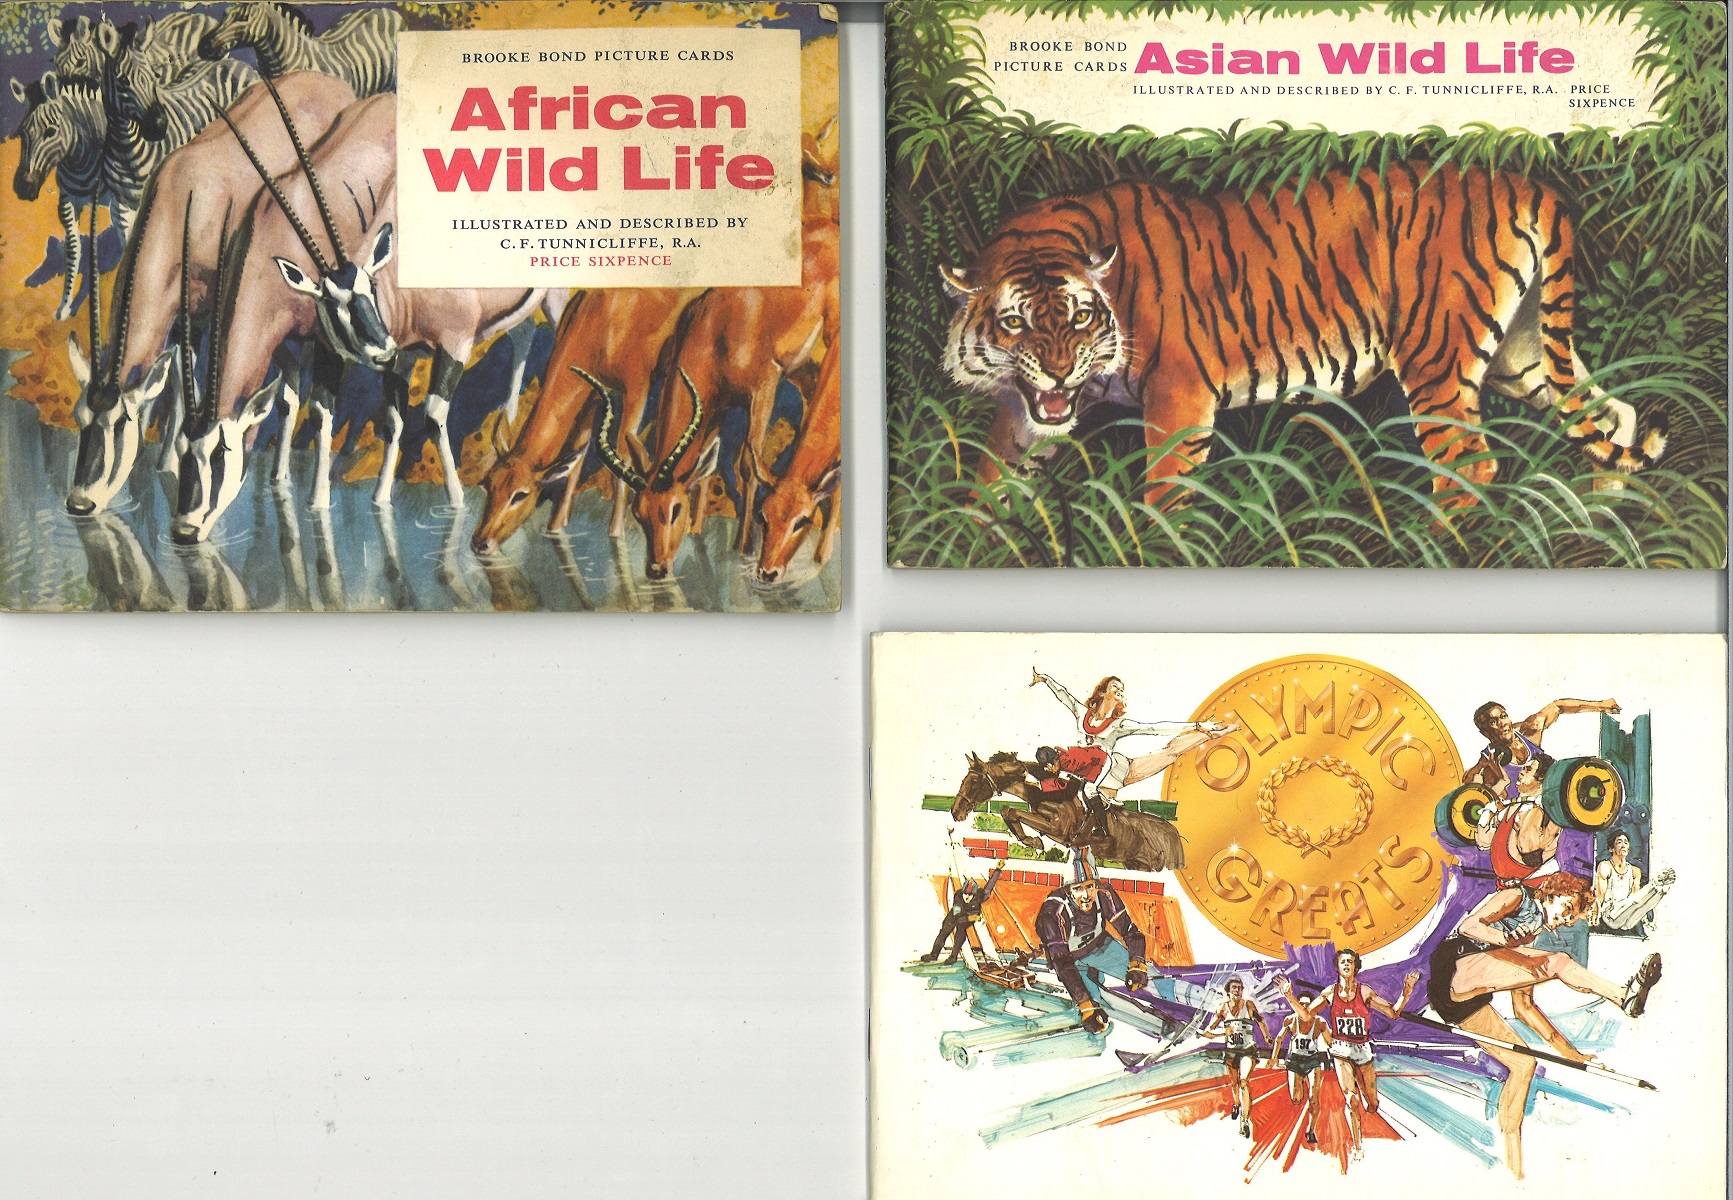 Cigarette card album collection from Brooke Bond. Complete sets. Includes Asian Wildlife, African